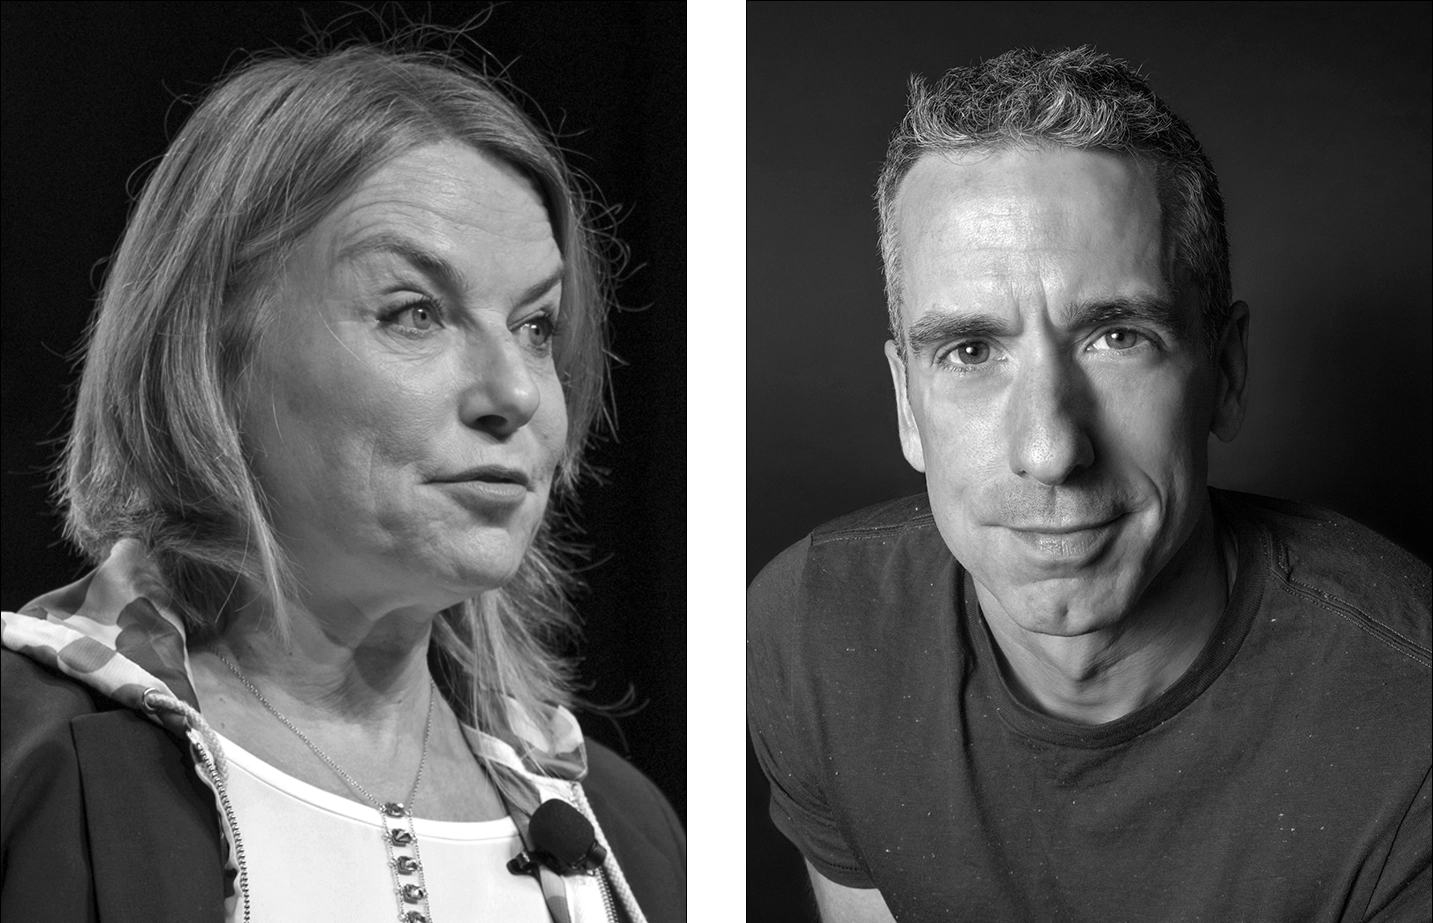 Portraits of Esther Perel and Dan Savage.